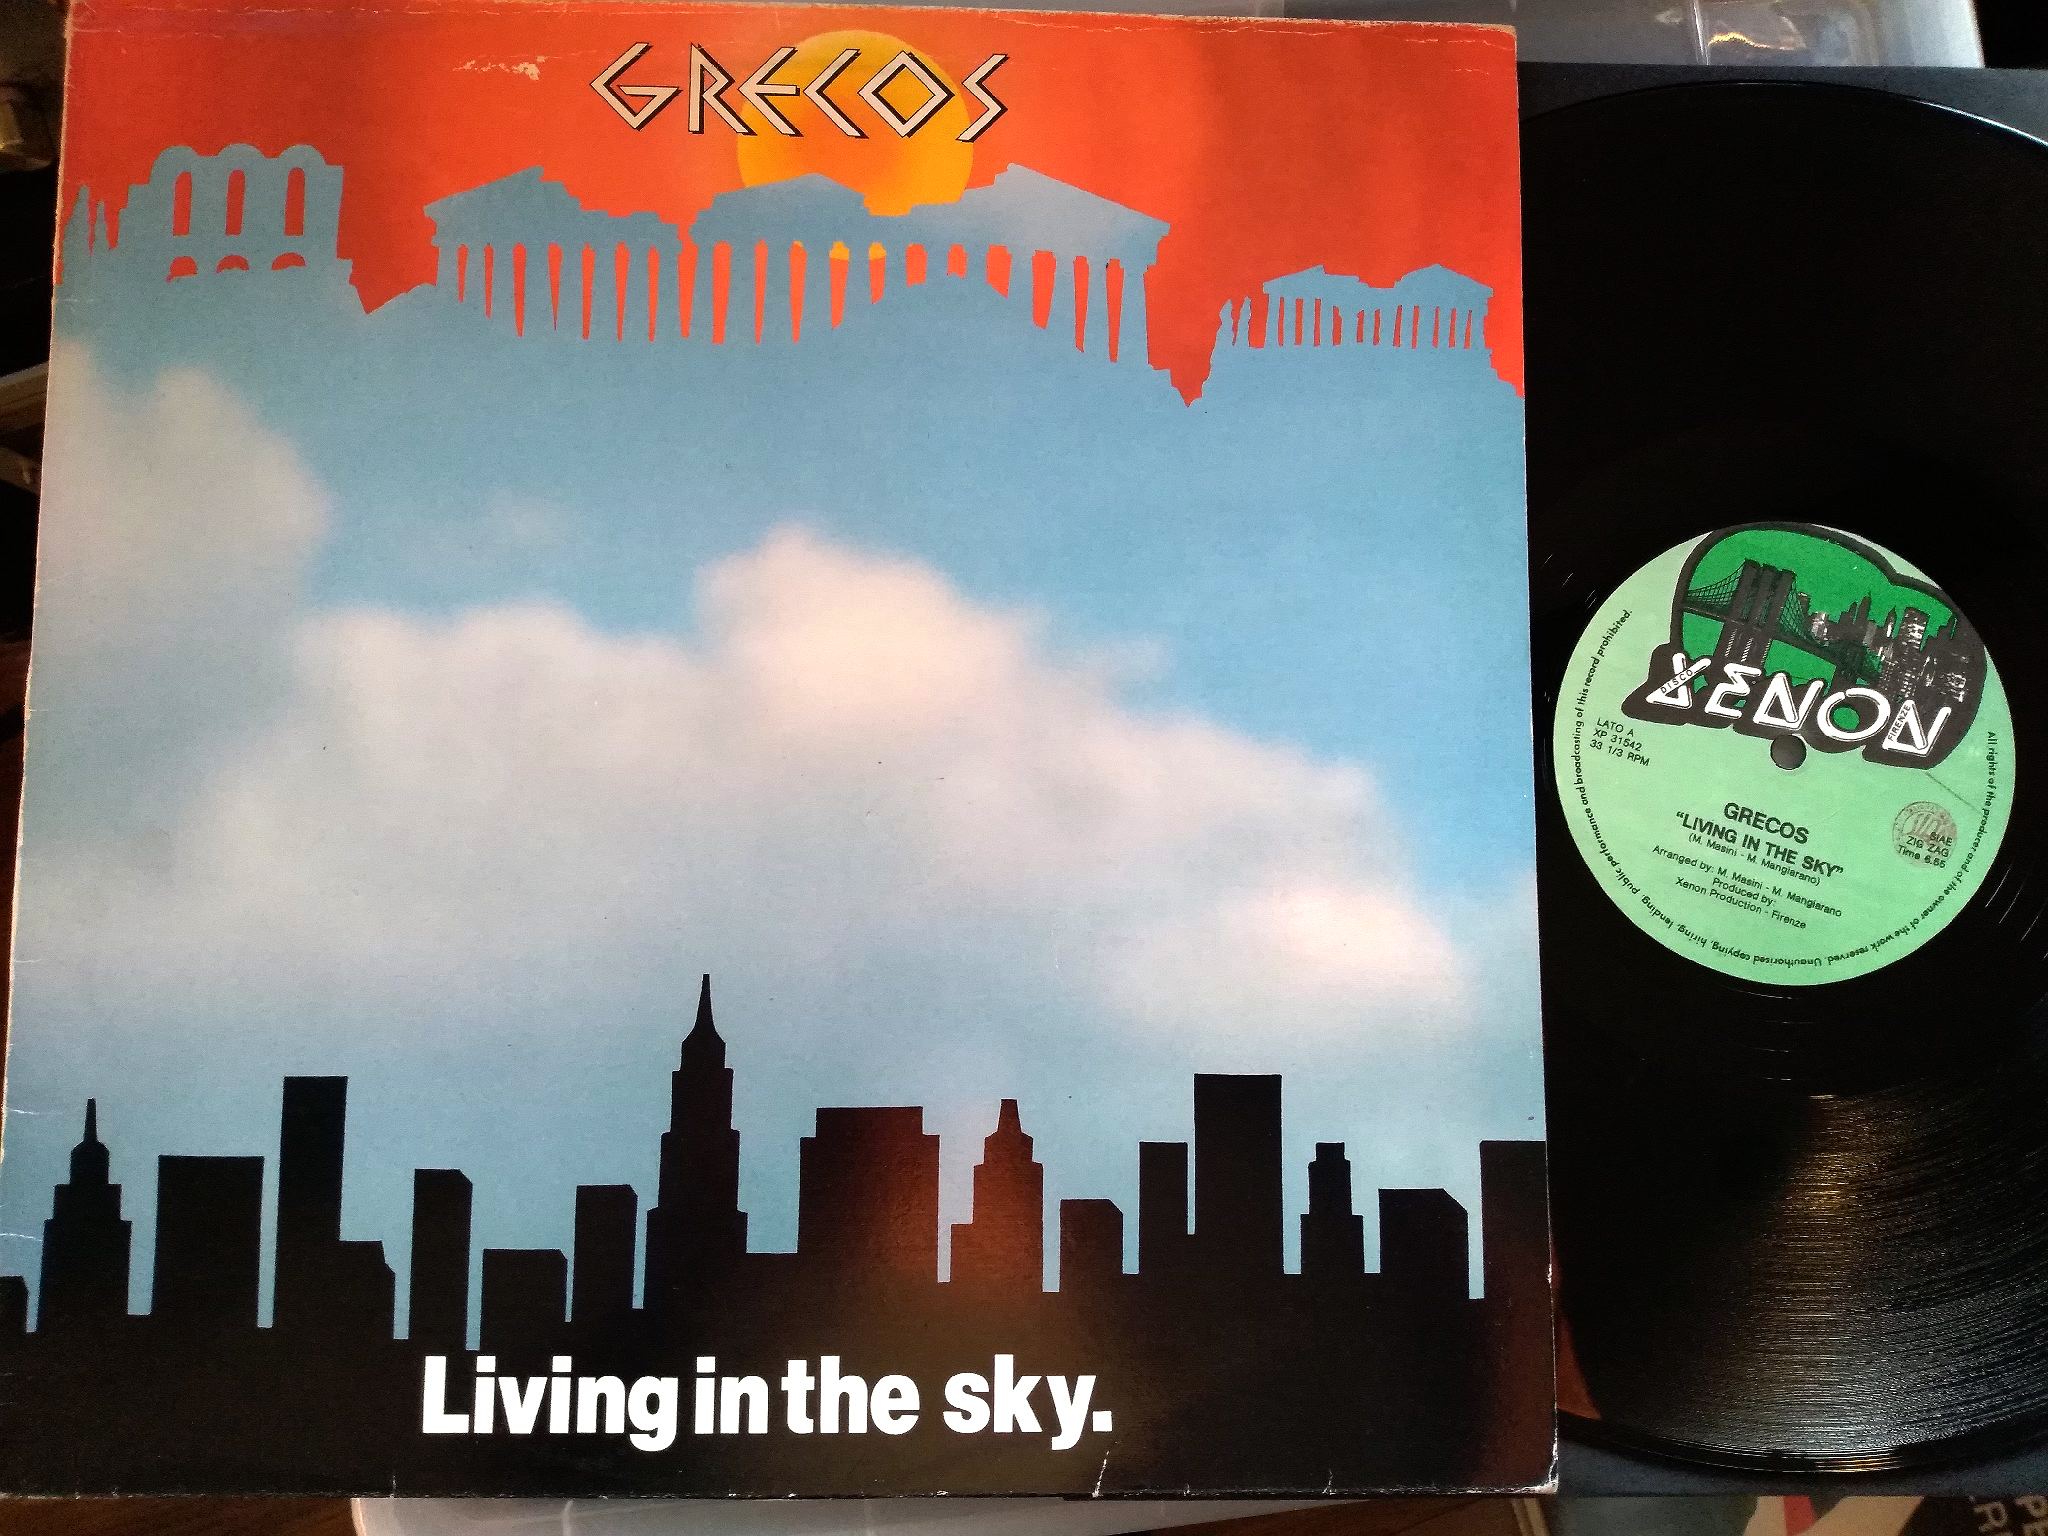 Grecos - Living In The Sky